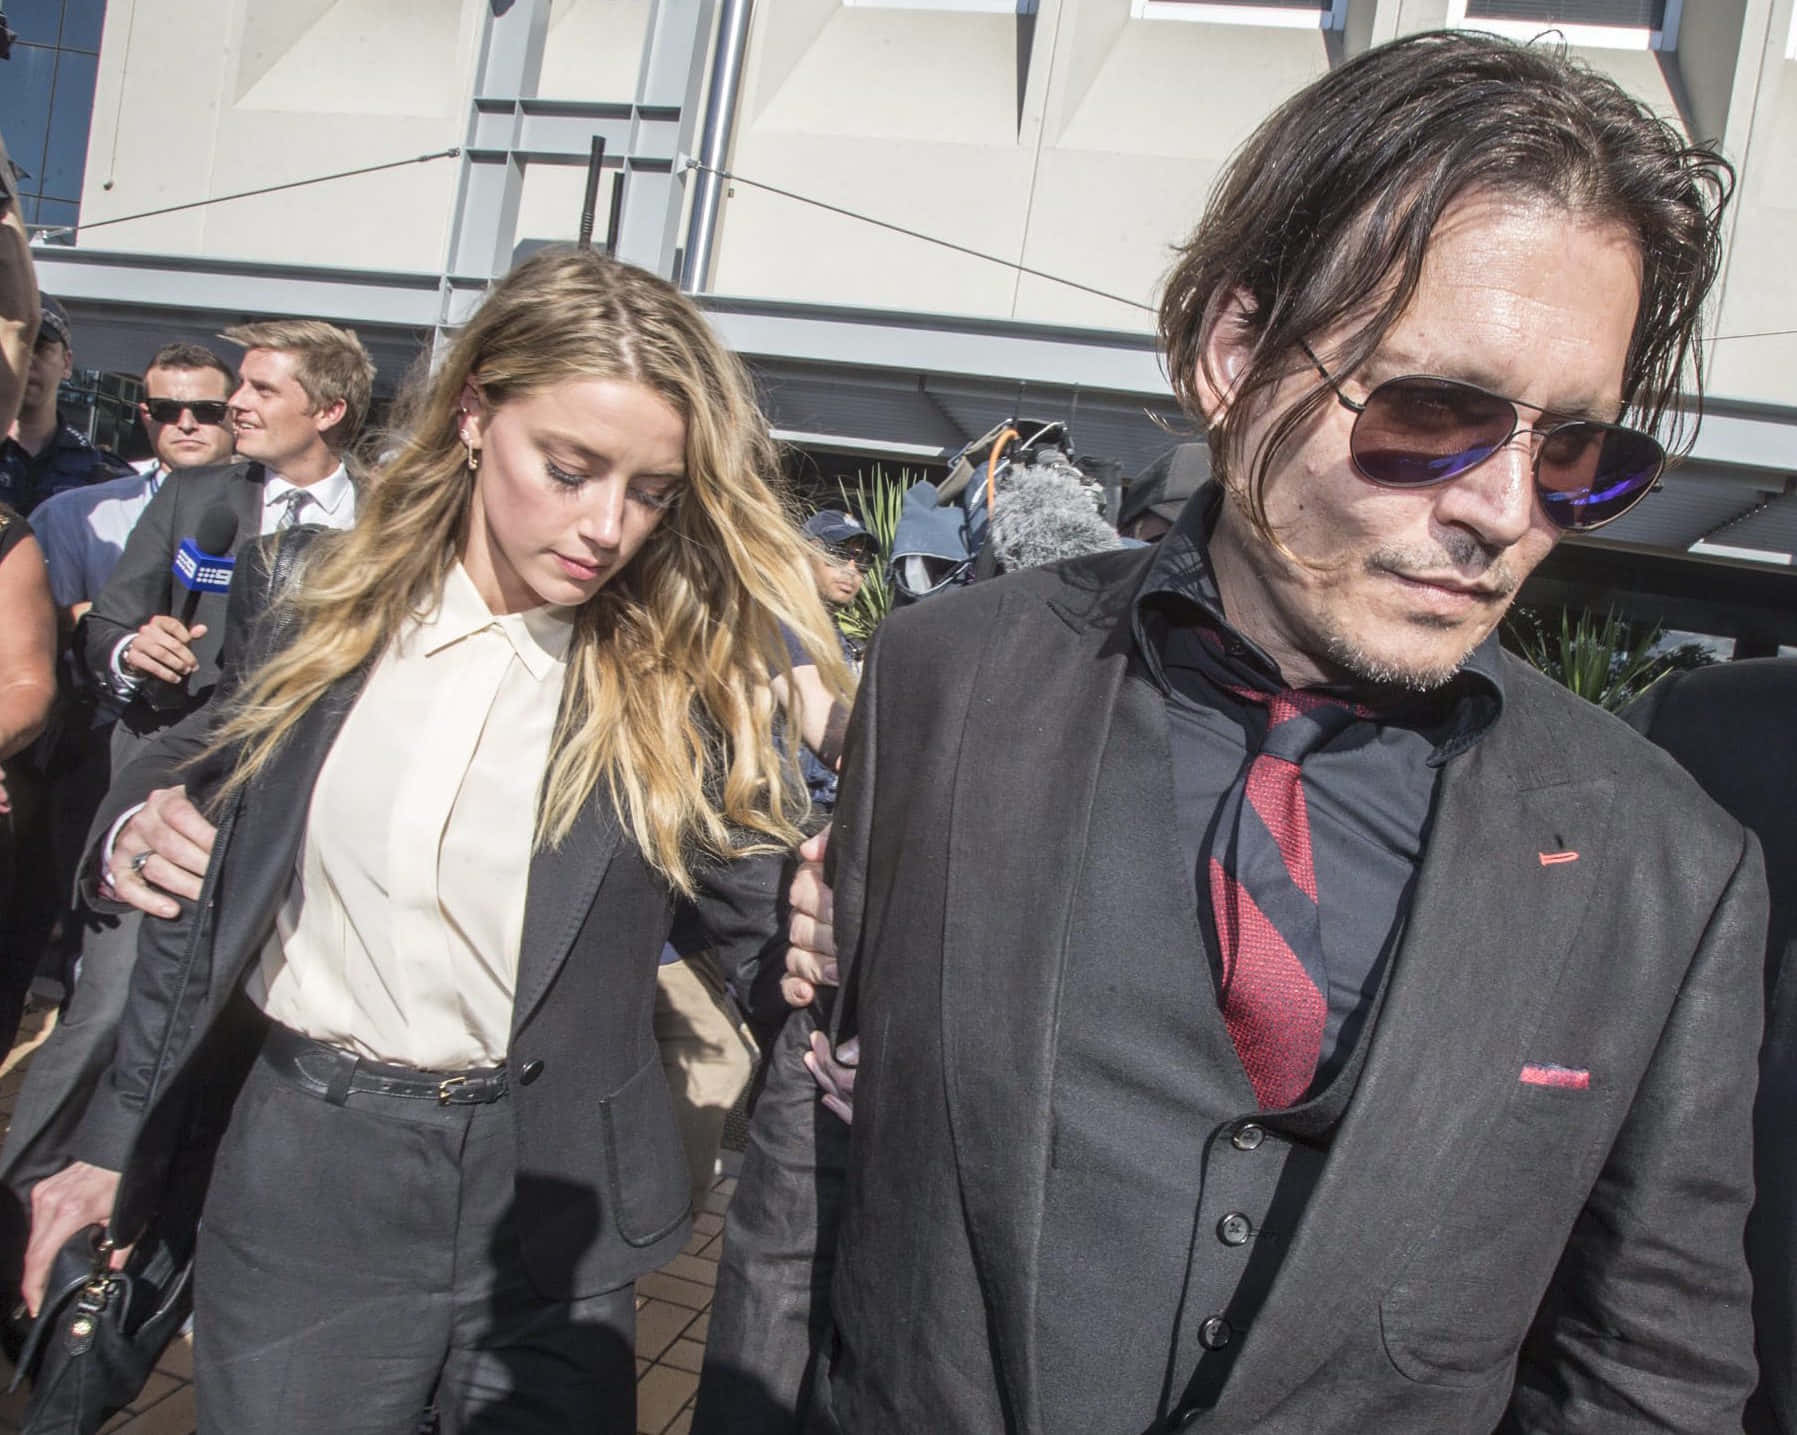 "Johnny Depp and Amber Heard on the red carpet of their movie premiere".